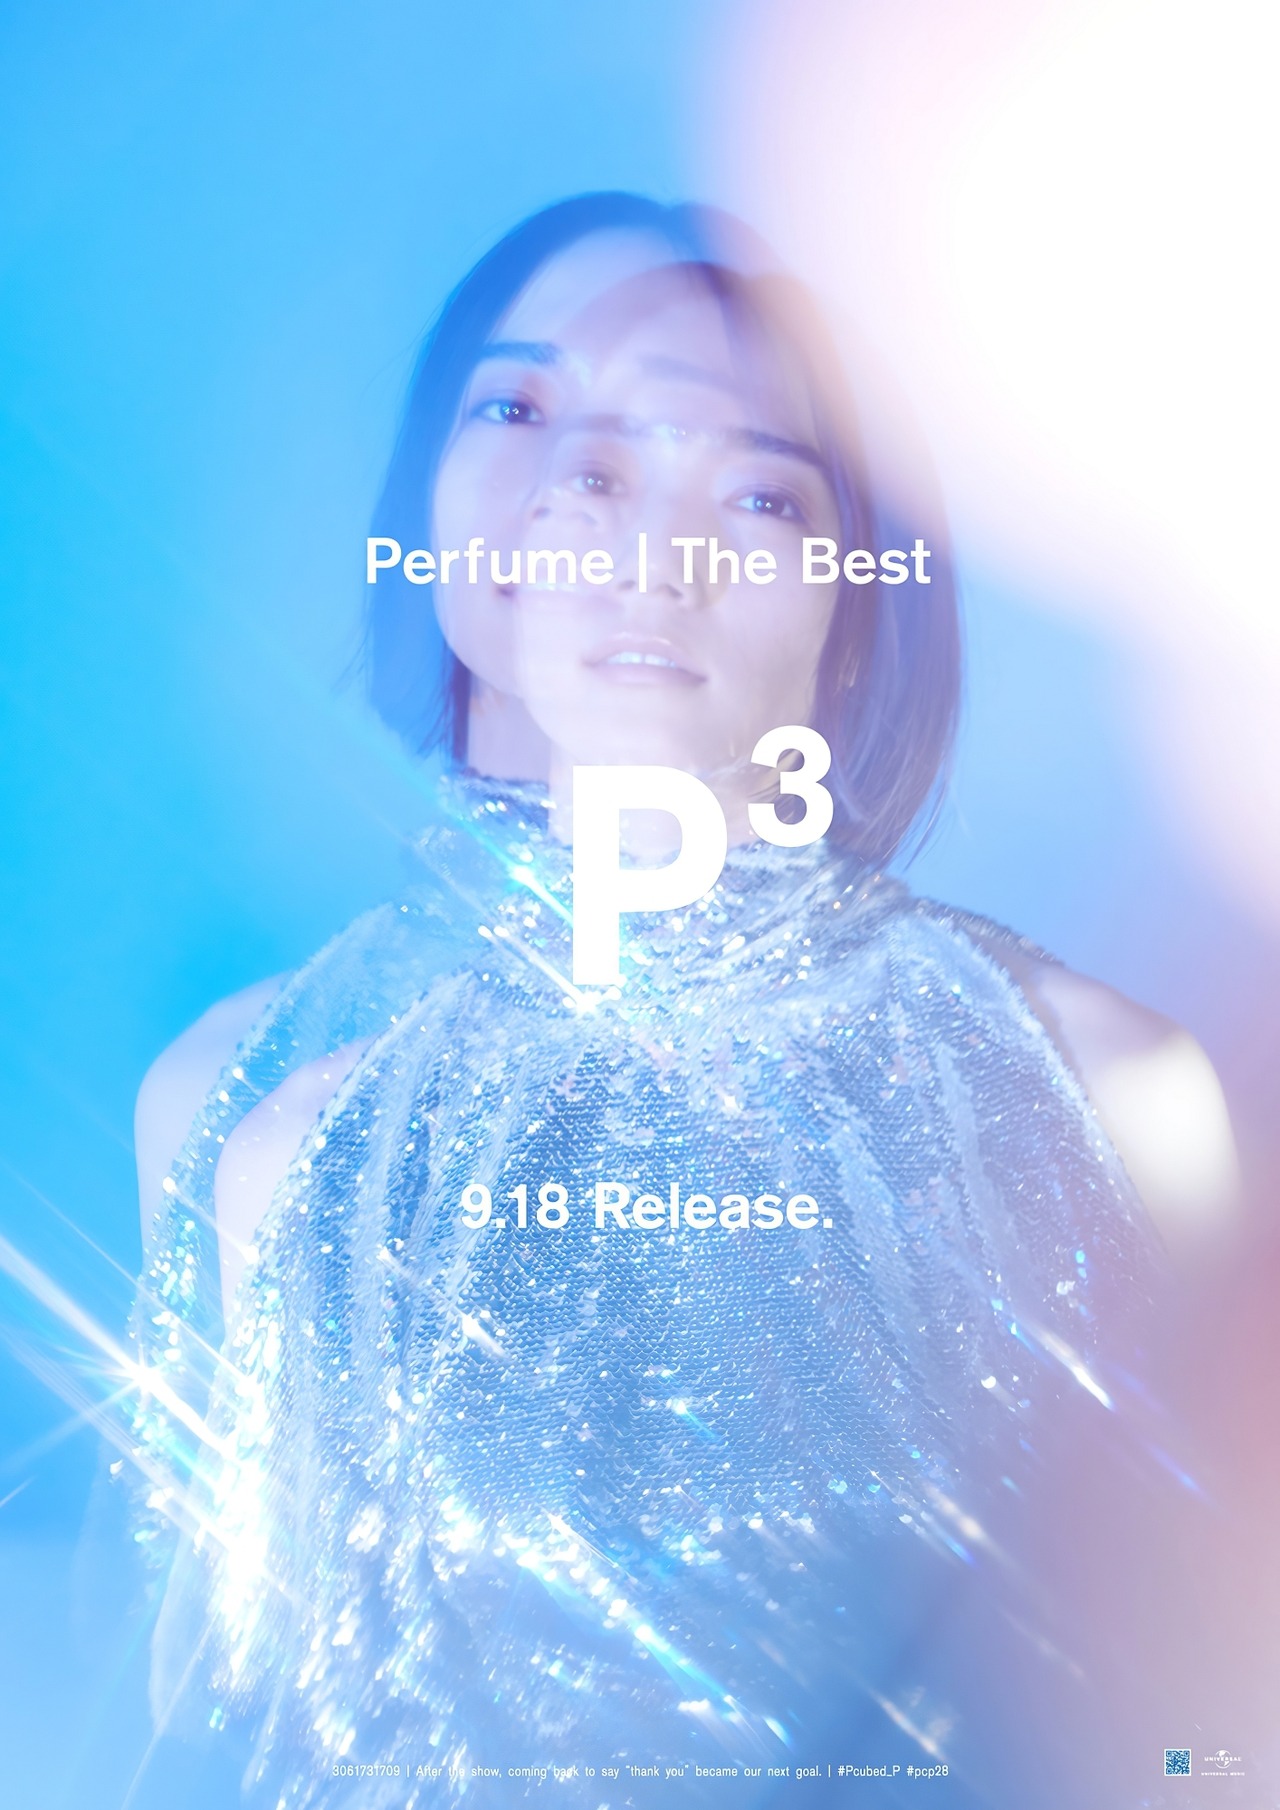 Yesterday Today And Tomorrow Perfume The Best P Cubed Poster